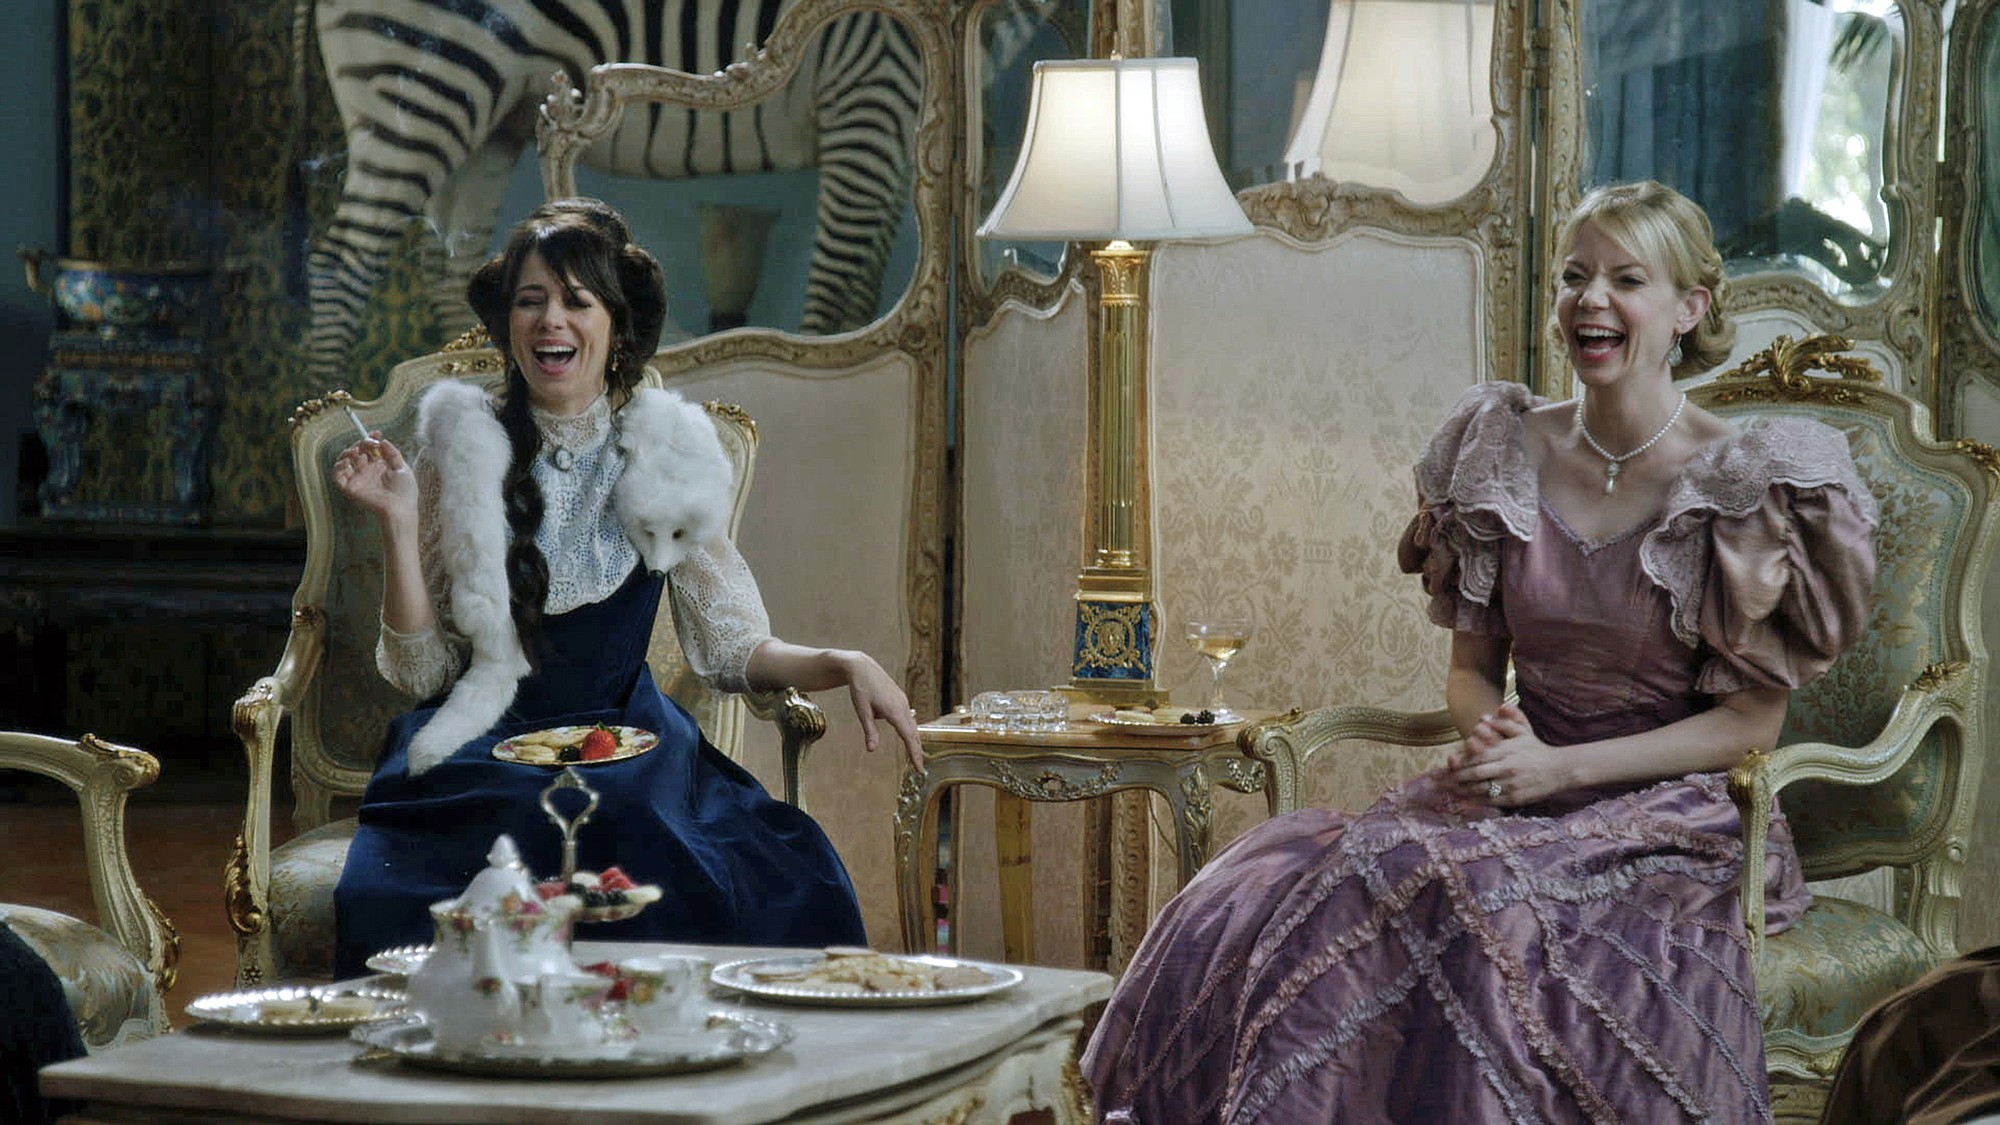 Comedy Central
Natasha Leggero and Riki Lindhome star in &quot;Another Period.&quot;